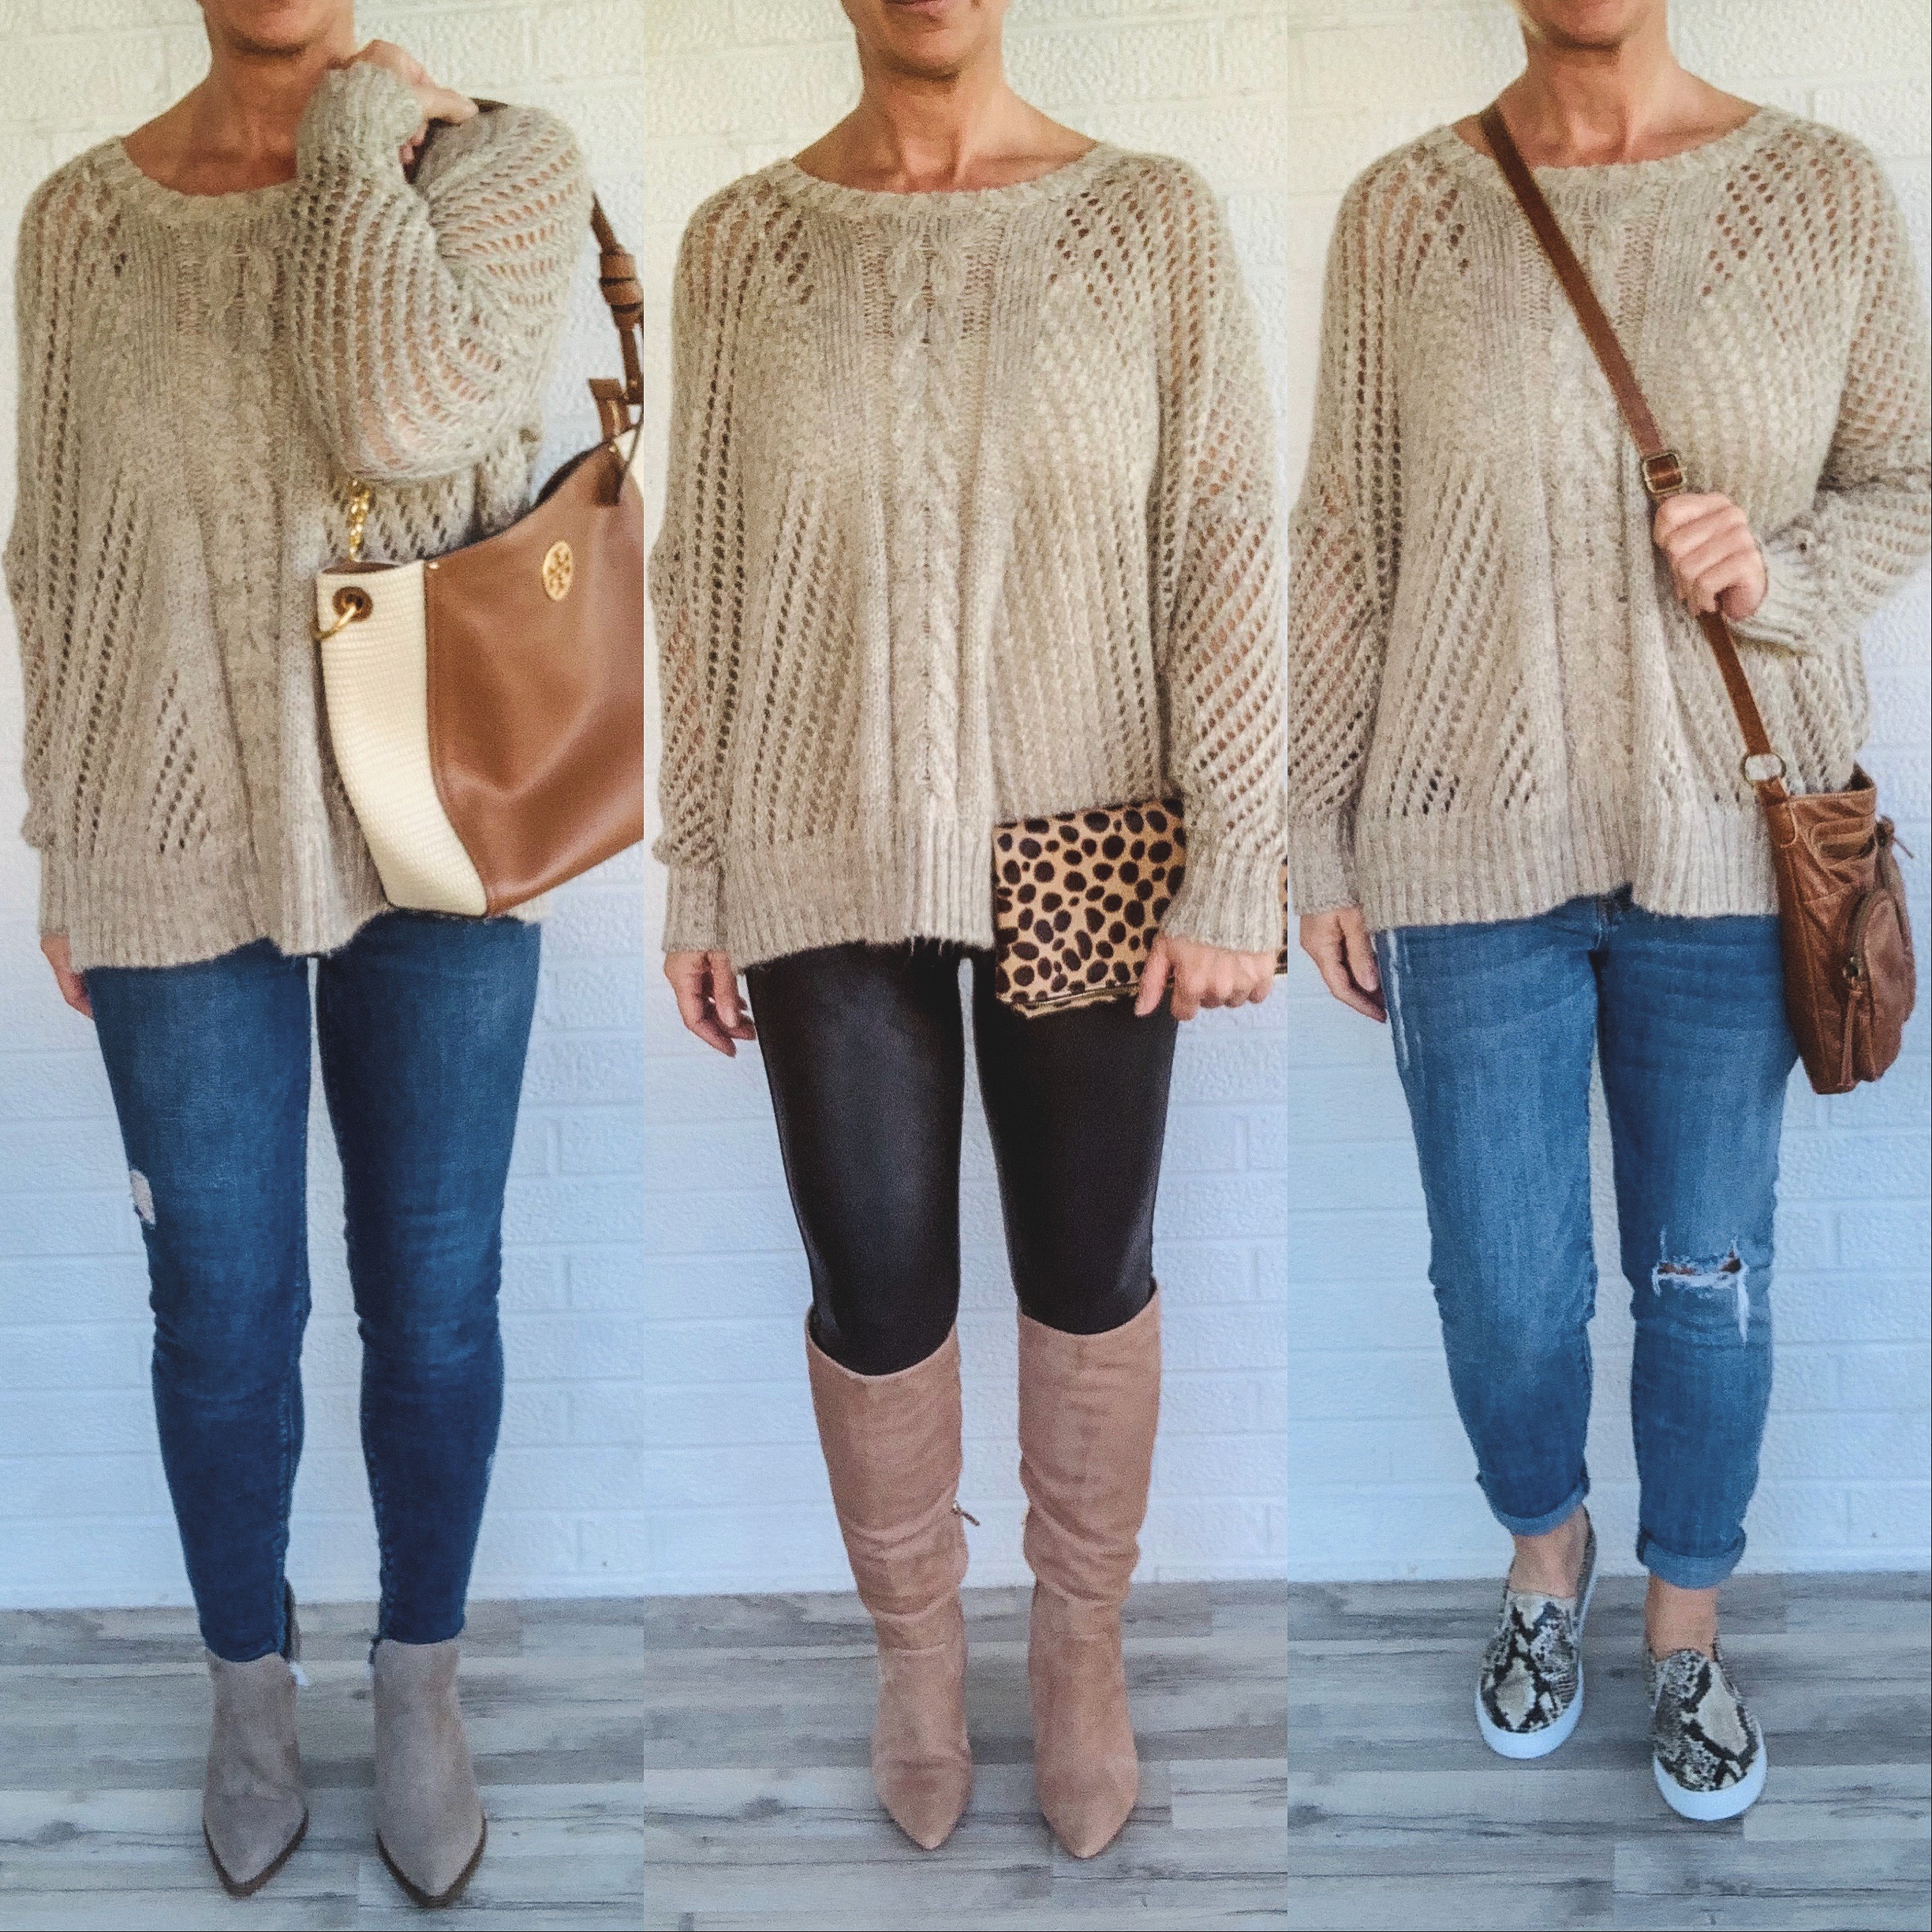 One comfy sweater, three fabulous looks.